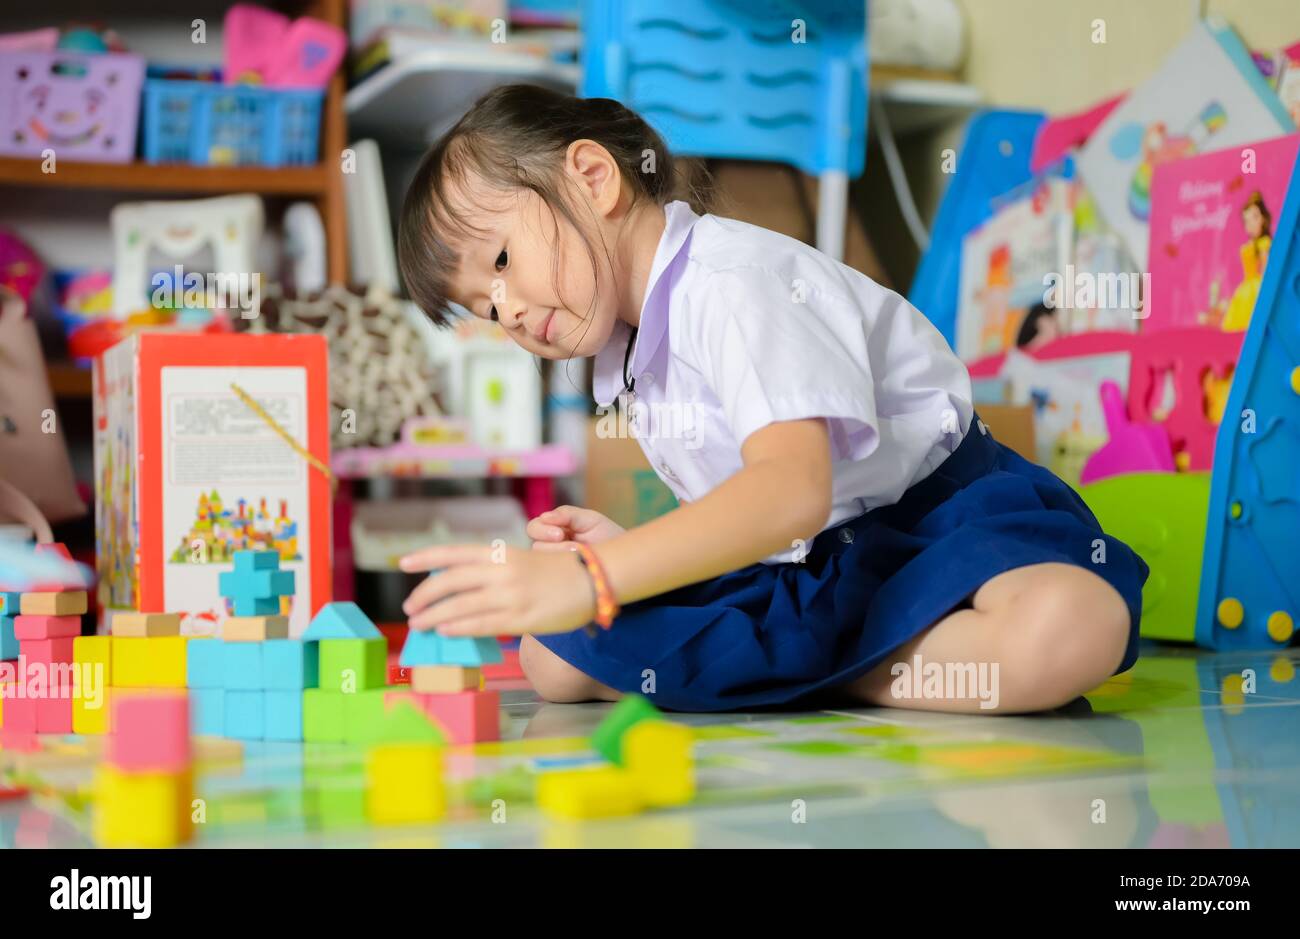 Child little girl play wood block toys in living room for developer enhance creativity and Imagination Stock Photo